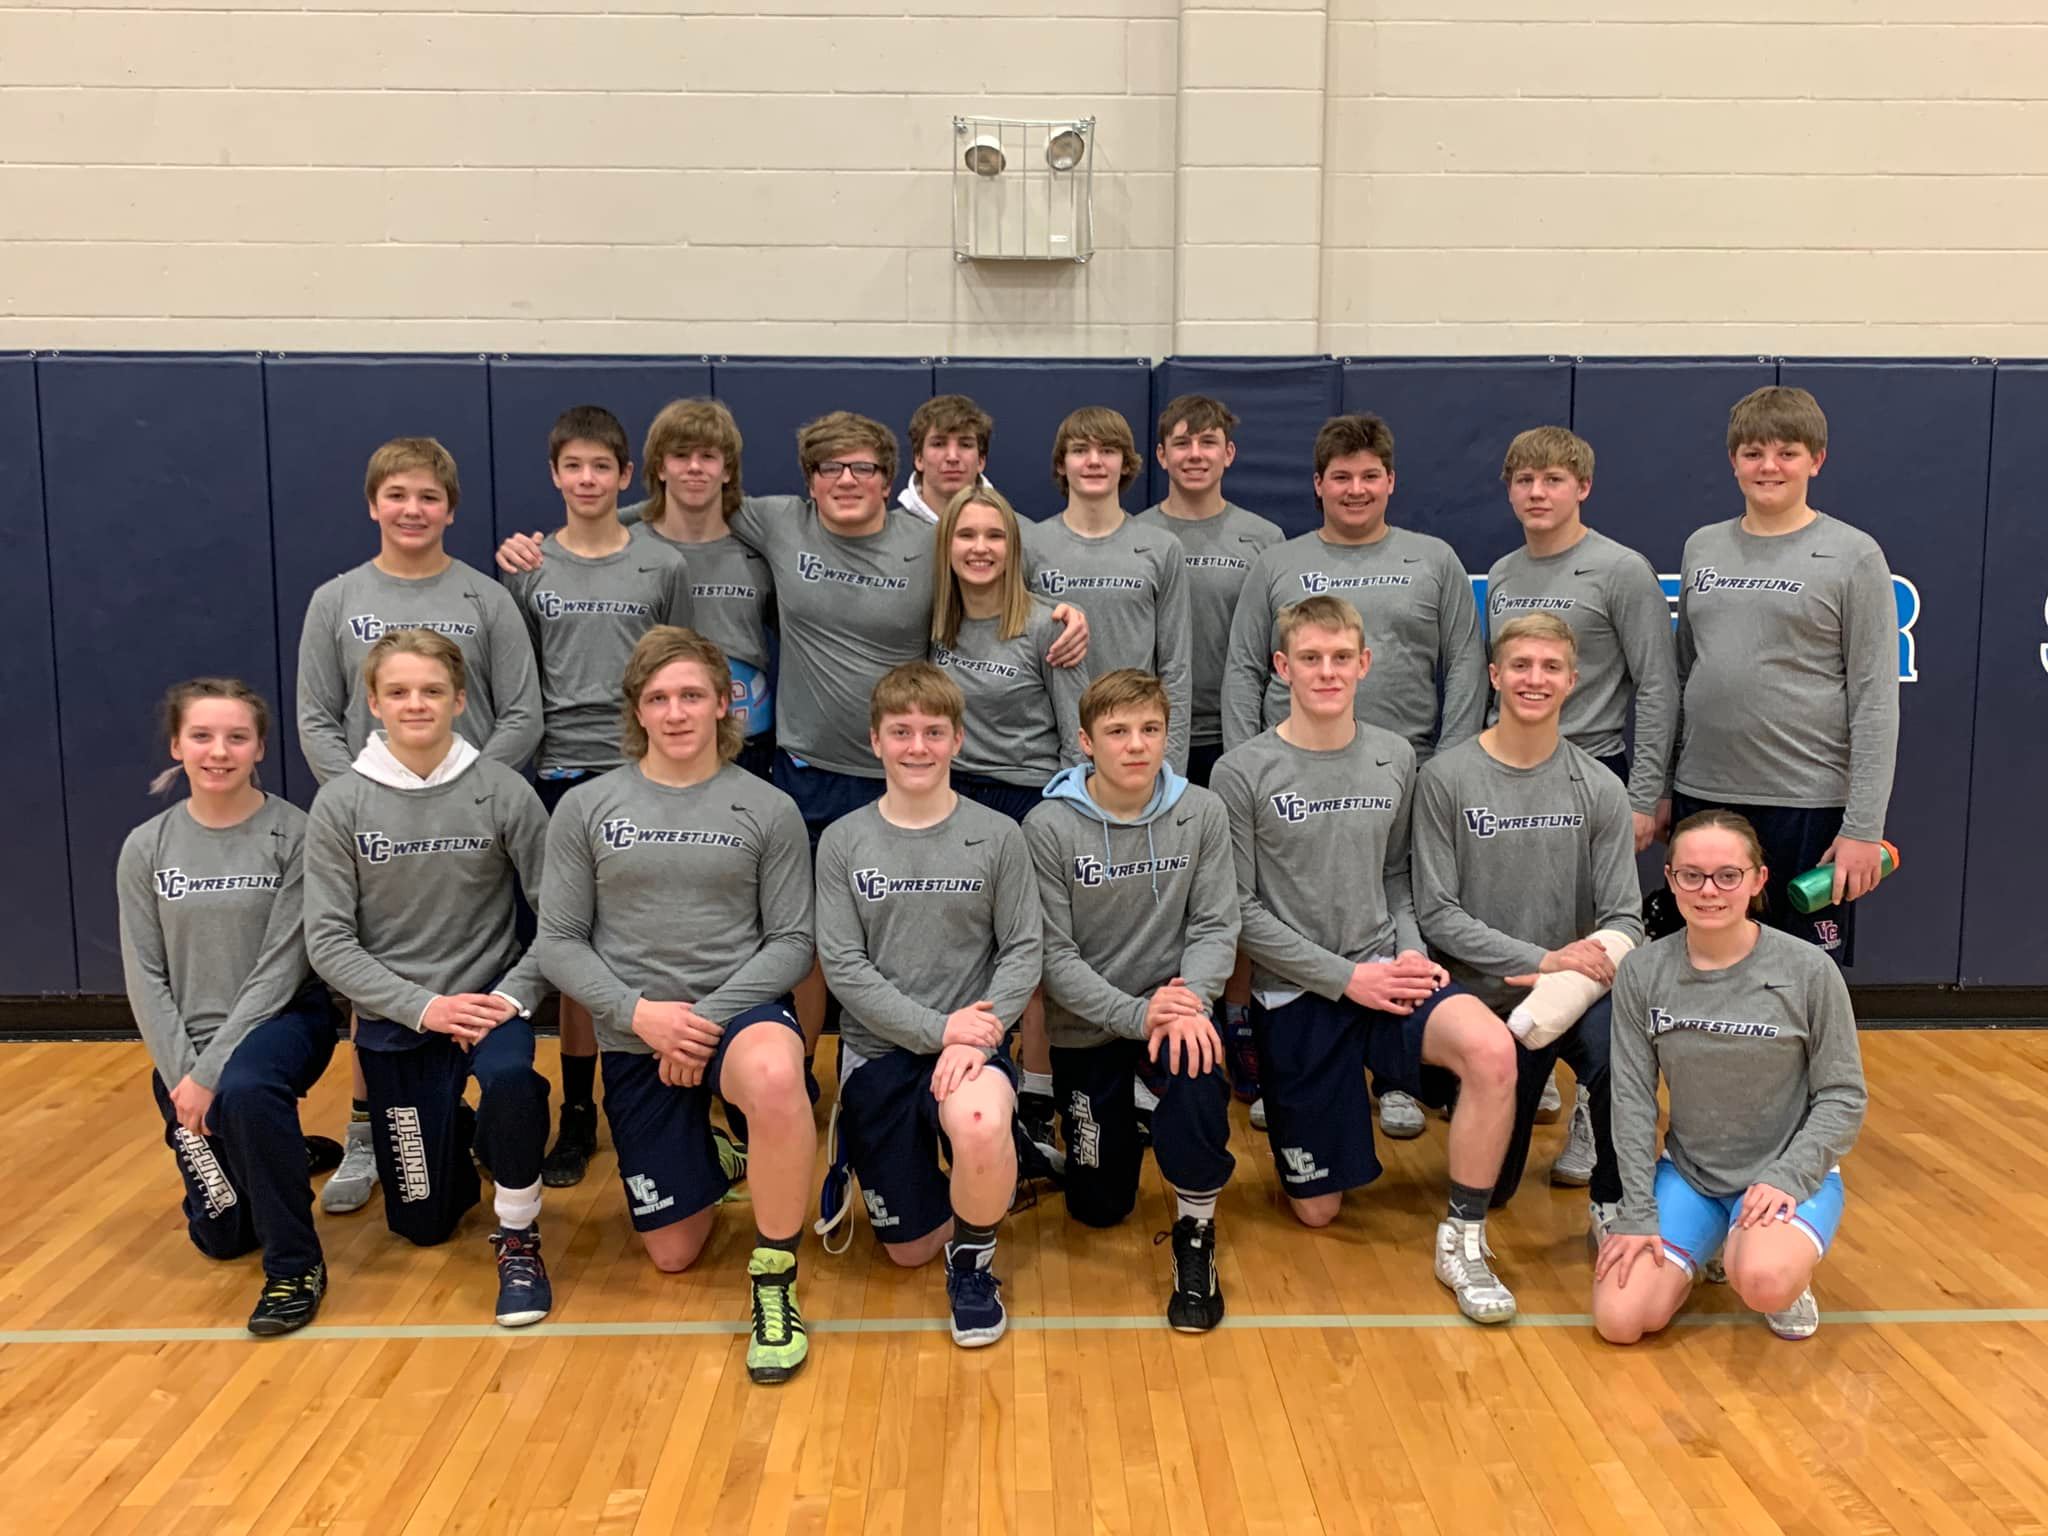 Wrestling team posing in matching t-shirts